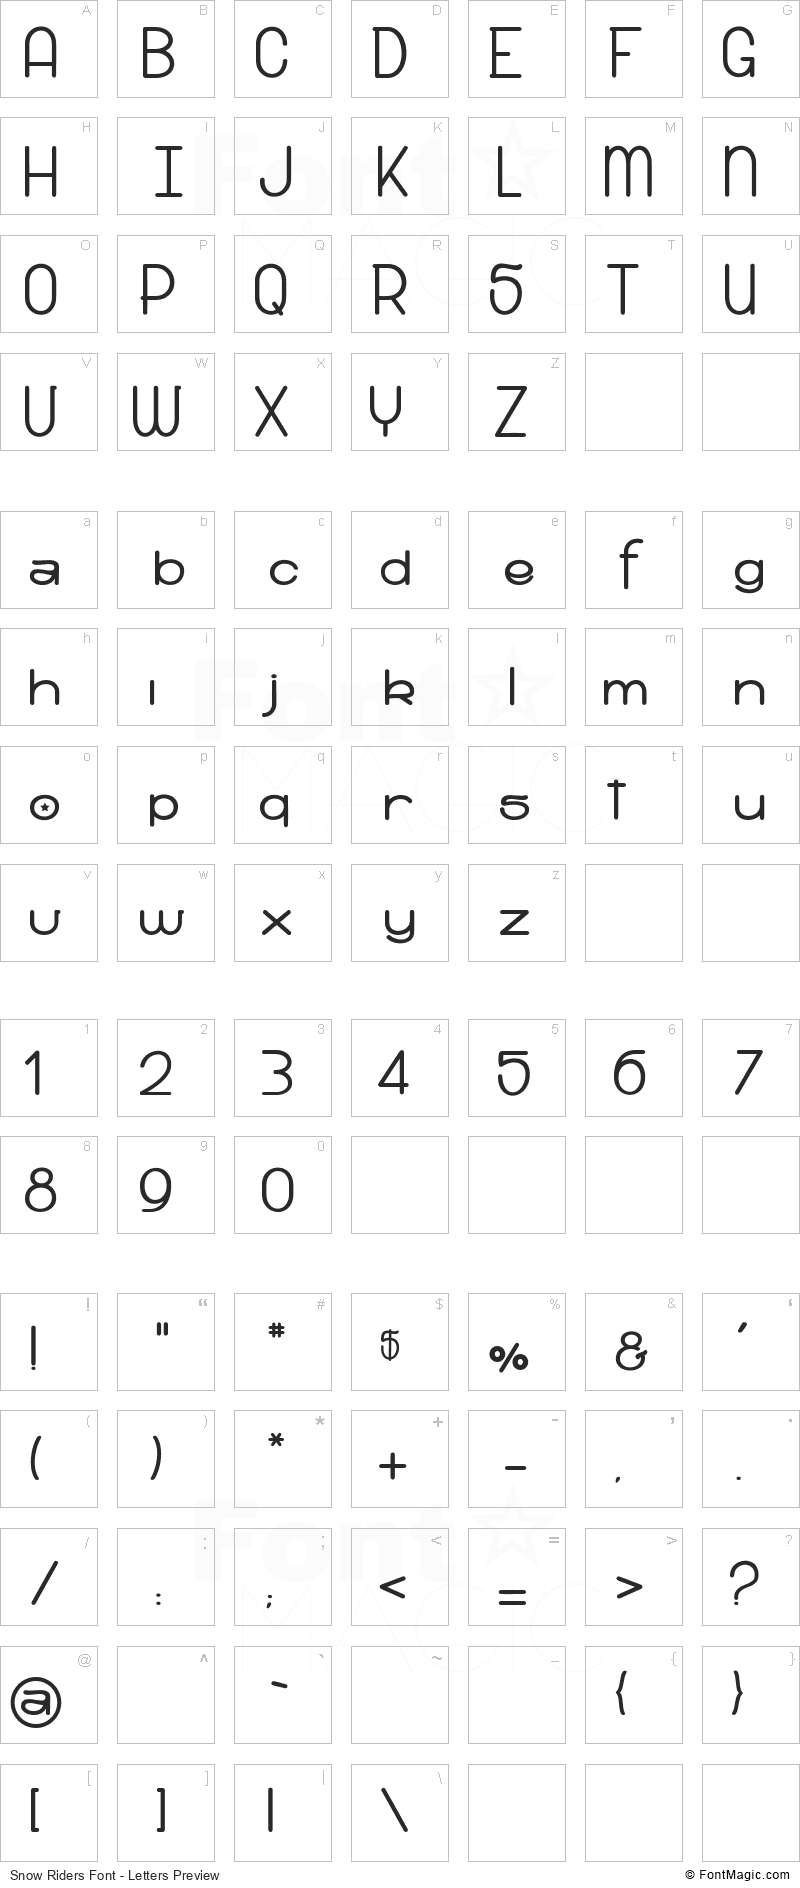 Snow Riders Font - All Latters Preview Chart